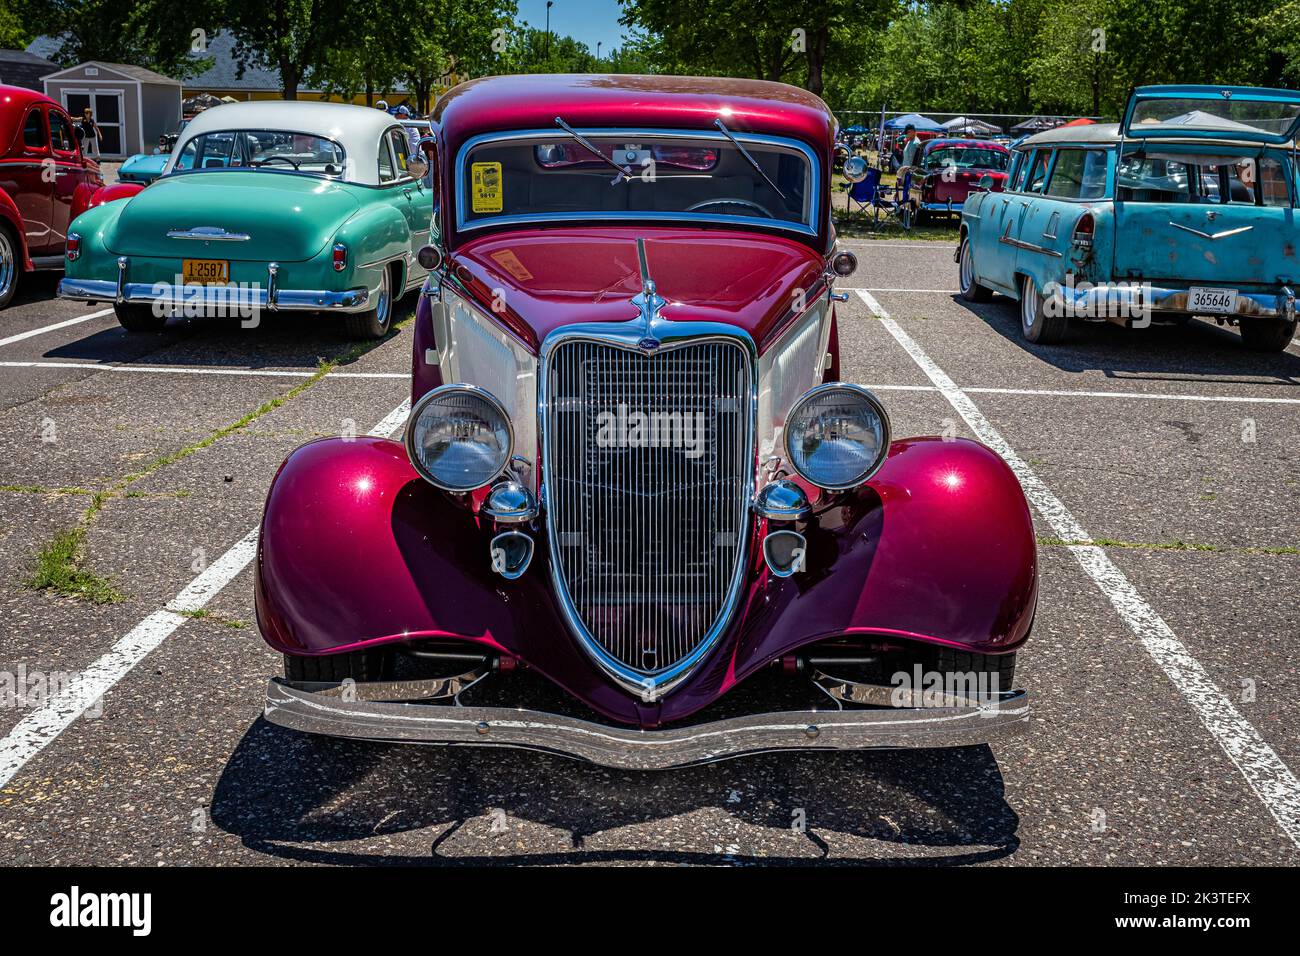 Falcon Heights, MN - June 18, 2022: High perspective front view of a 1934 Ford Model 40 Tudor Sedan at a local car show. Stock Photo